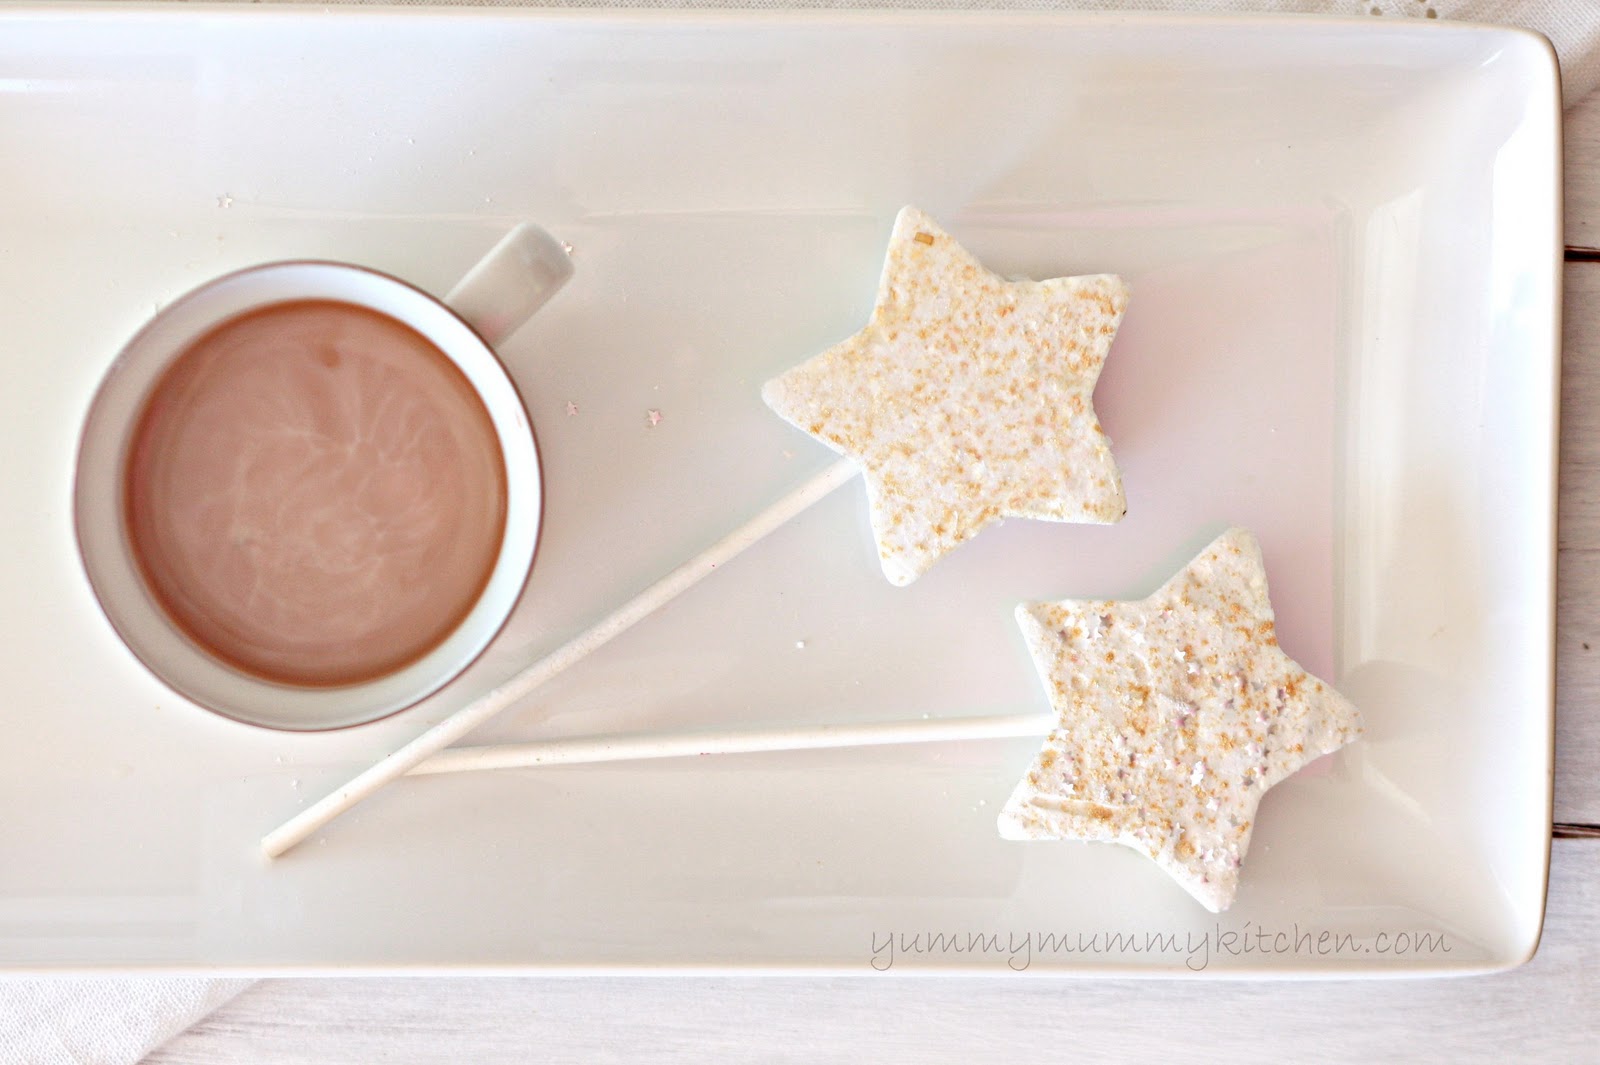 Two star-shaped marshmallows topped with edible gold glitter with sticks for stirring on a whit eplatter next to a mug of hot chocolate. 